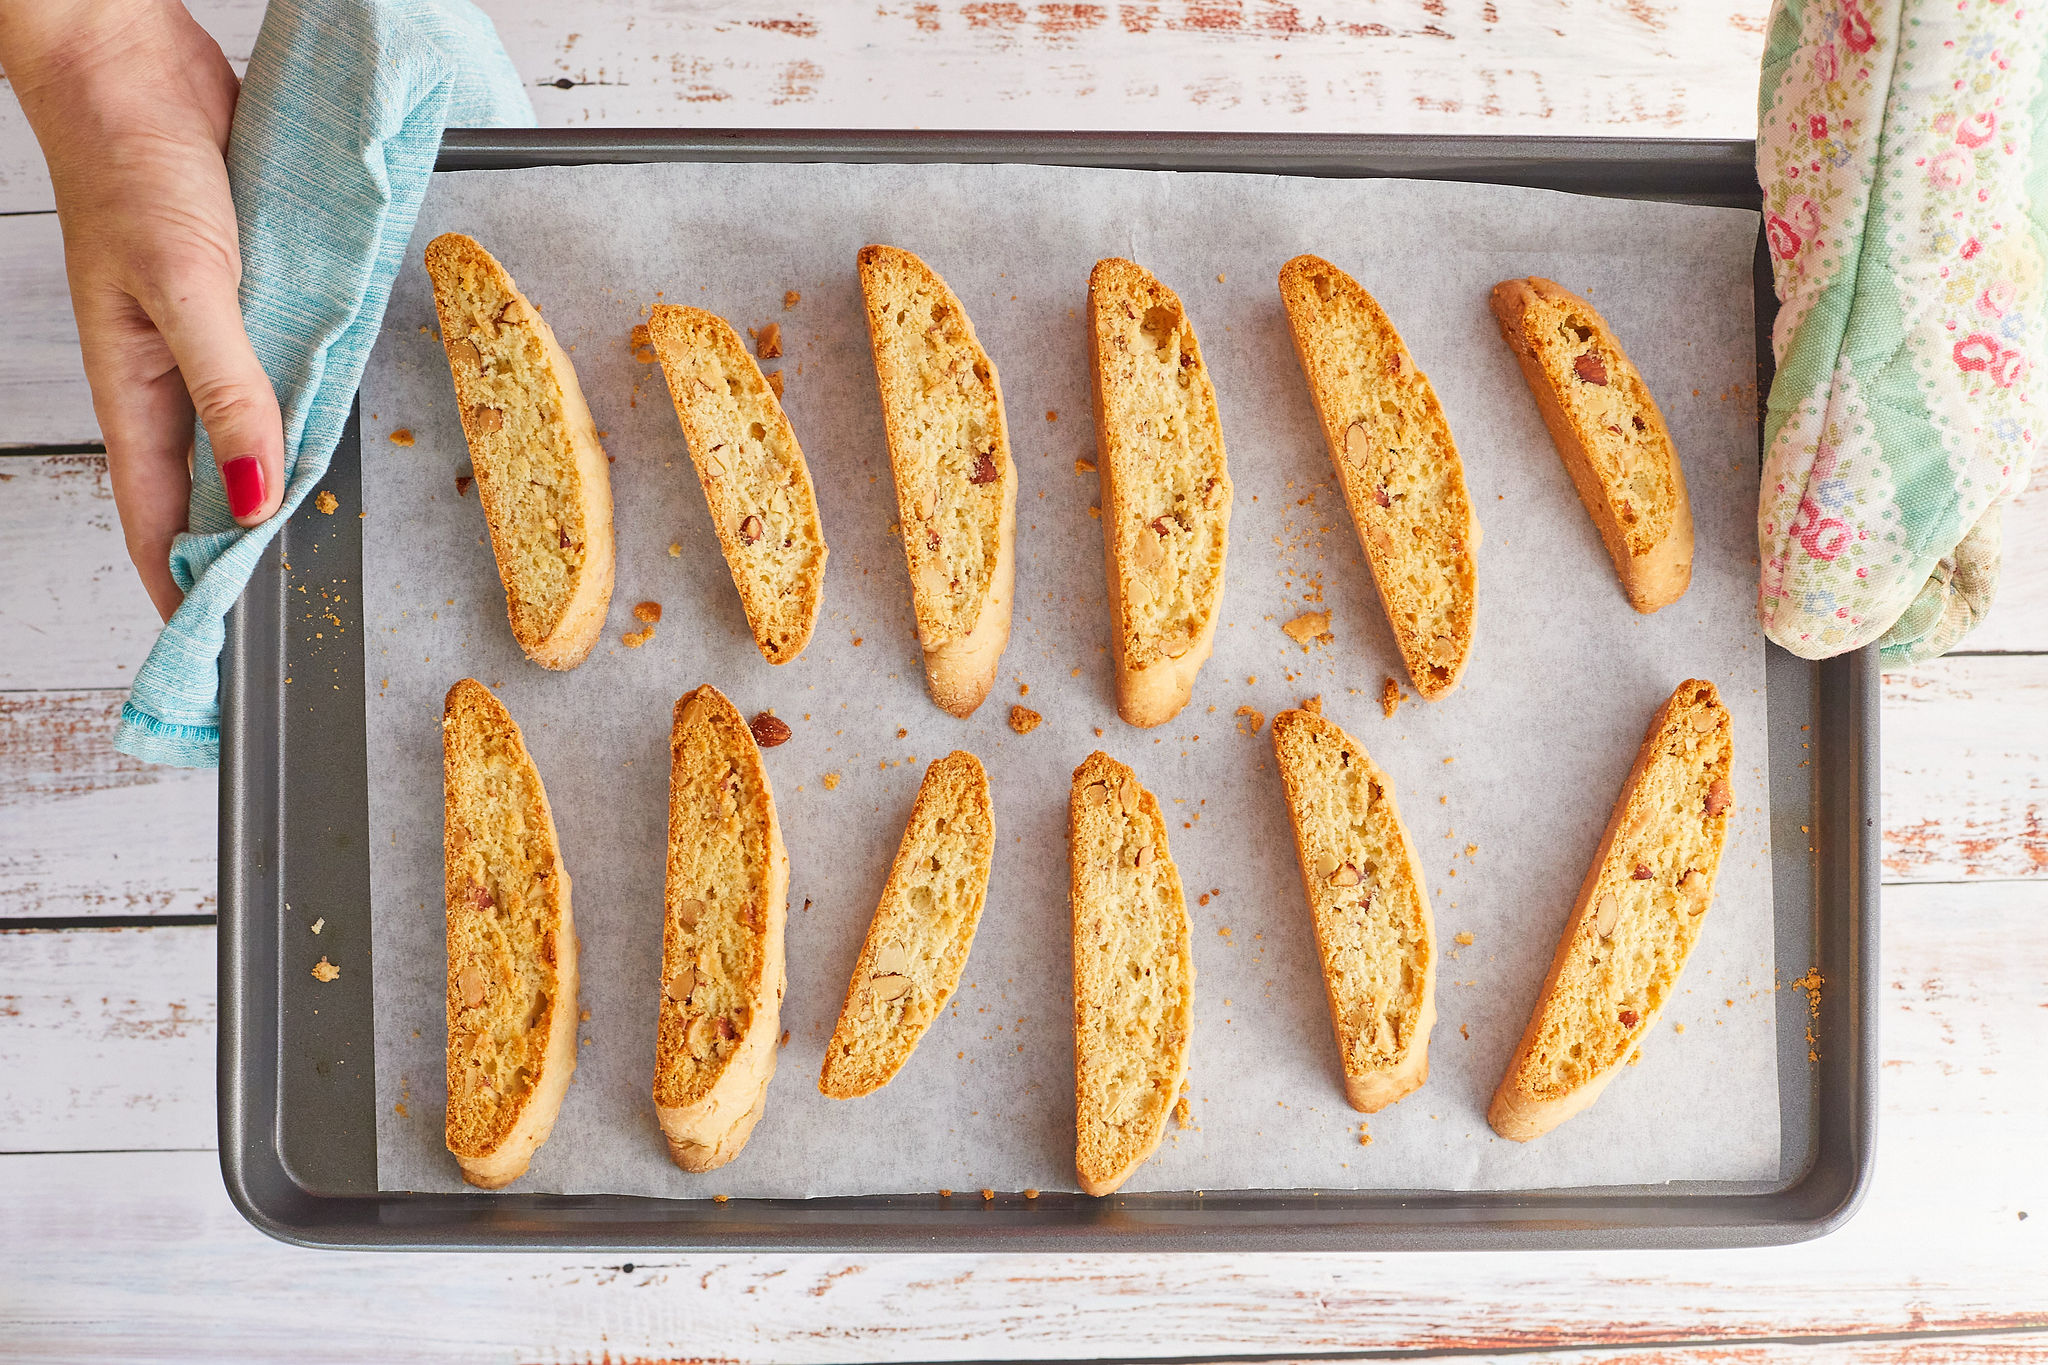 Almond Biscotti With Anise Recipe